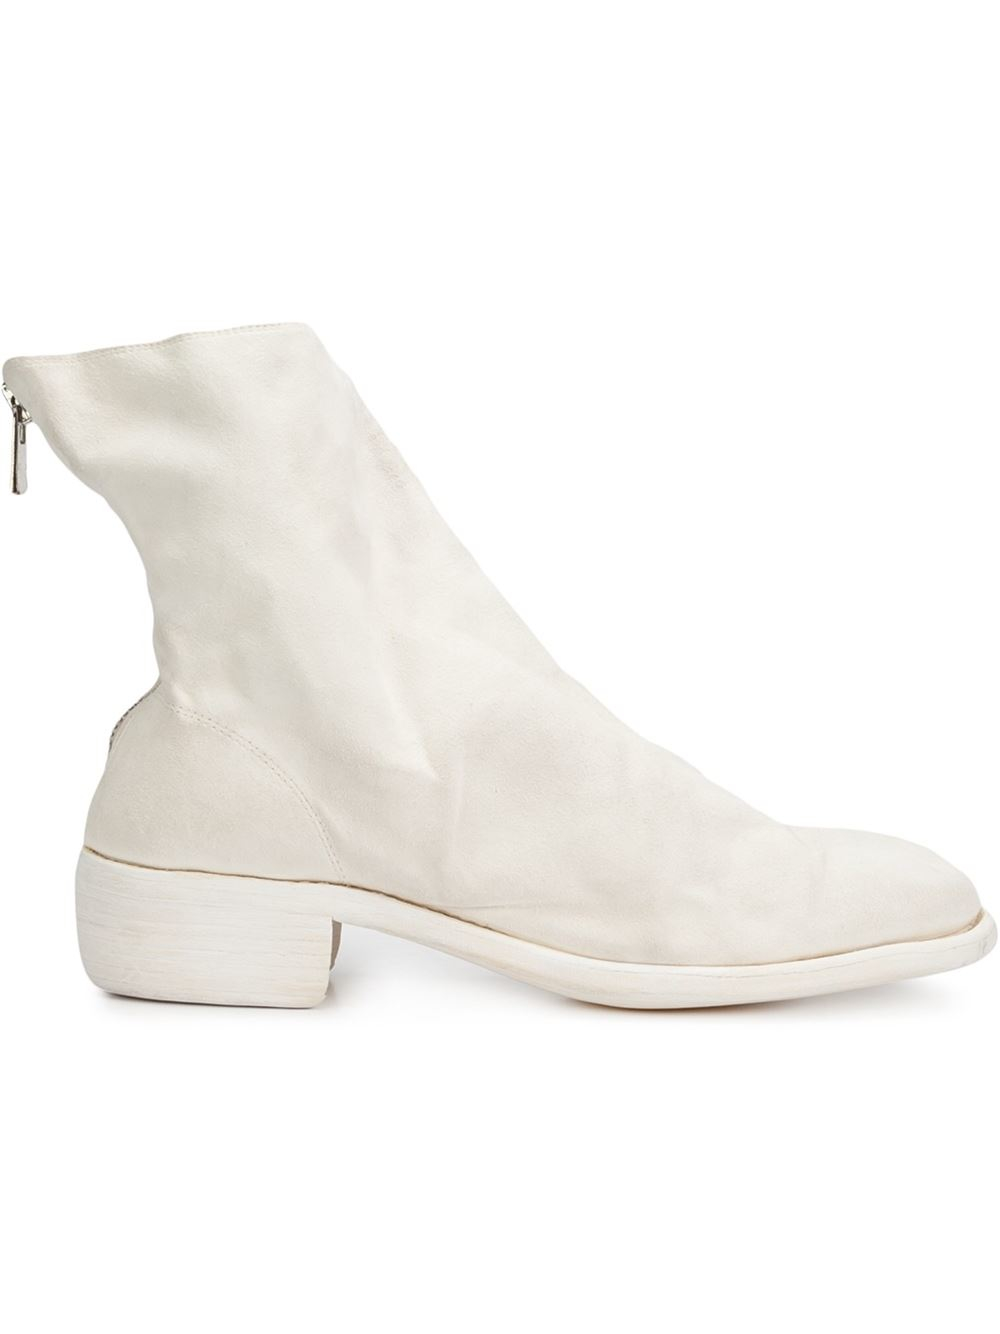 Guidi Leather '796' Boots in White (Yellow) for Men - Lyst